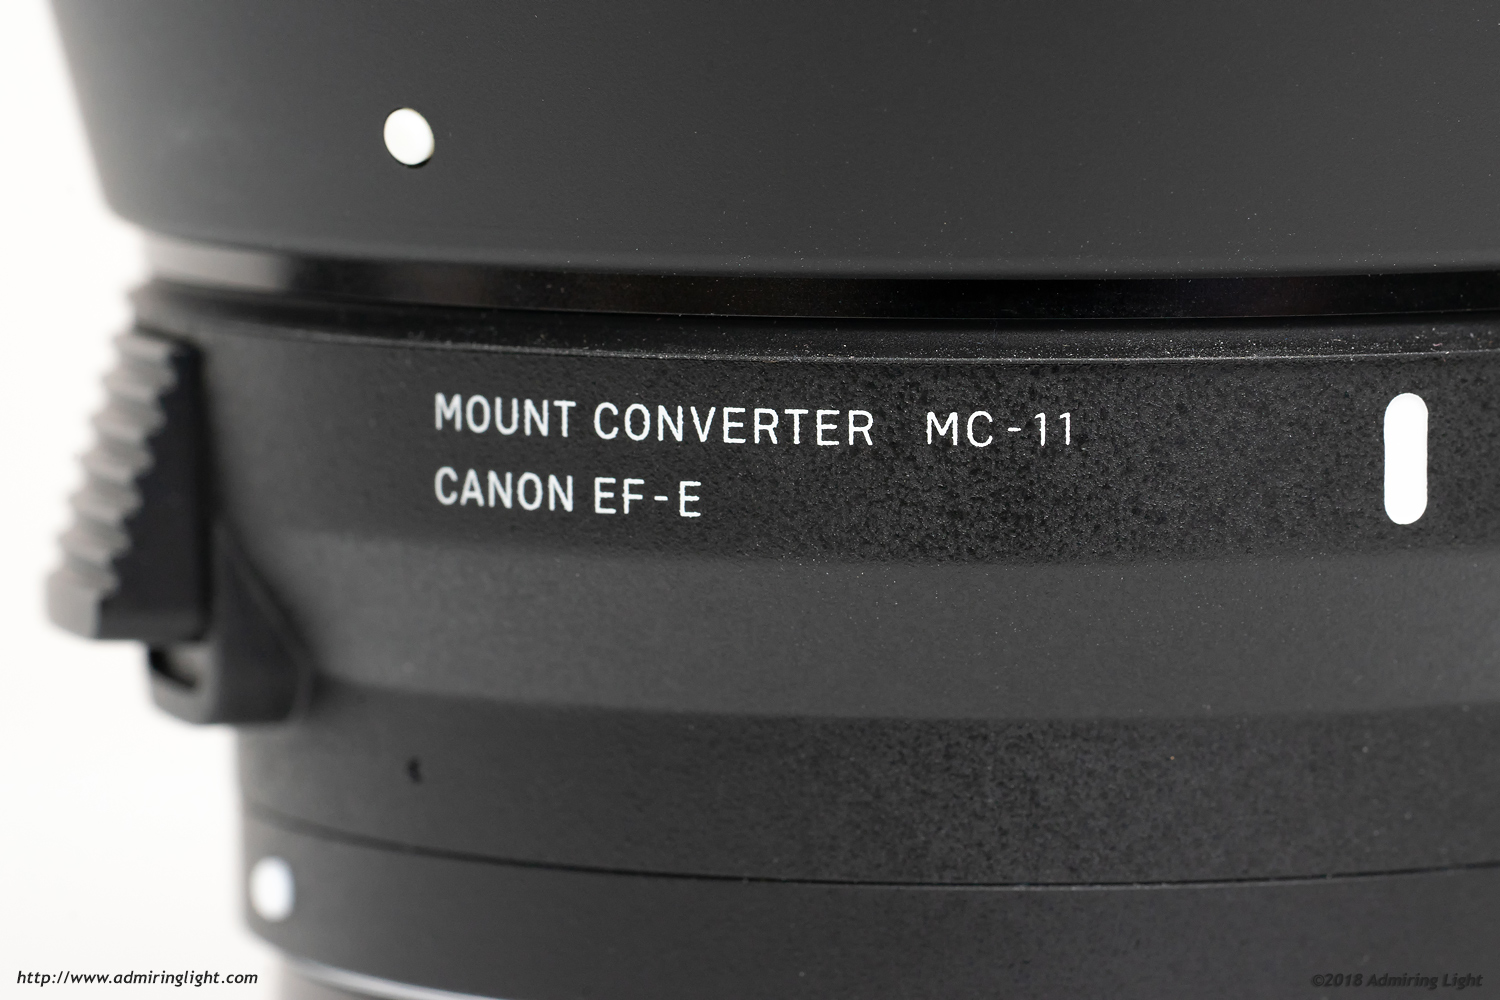 Review: Sigma 100-400mm f/5-6.3 DG OS HSM (Canon EF Mount) + MC-11 